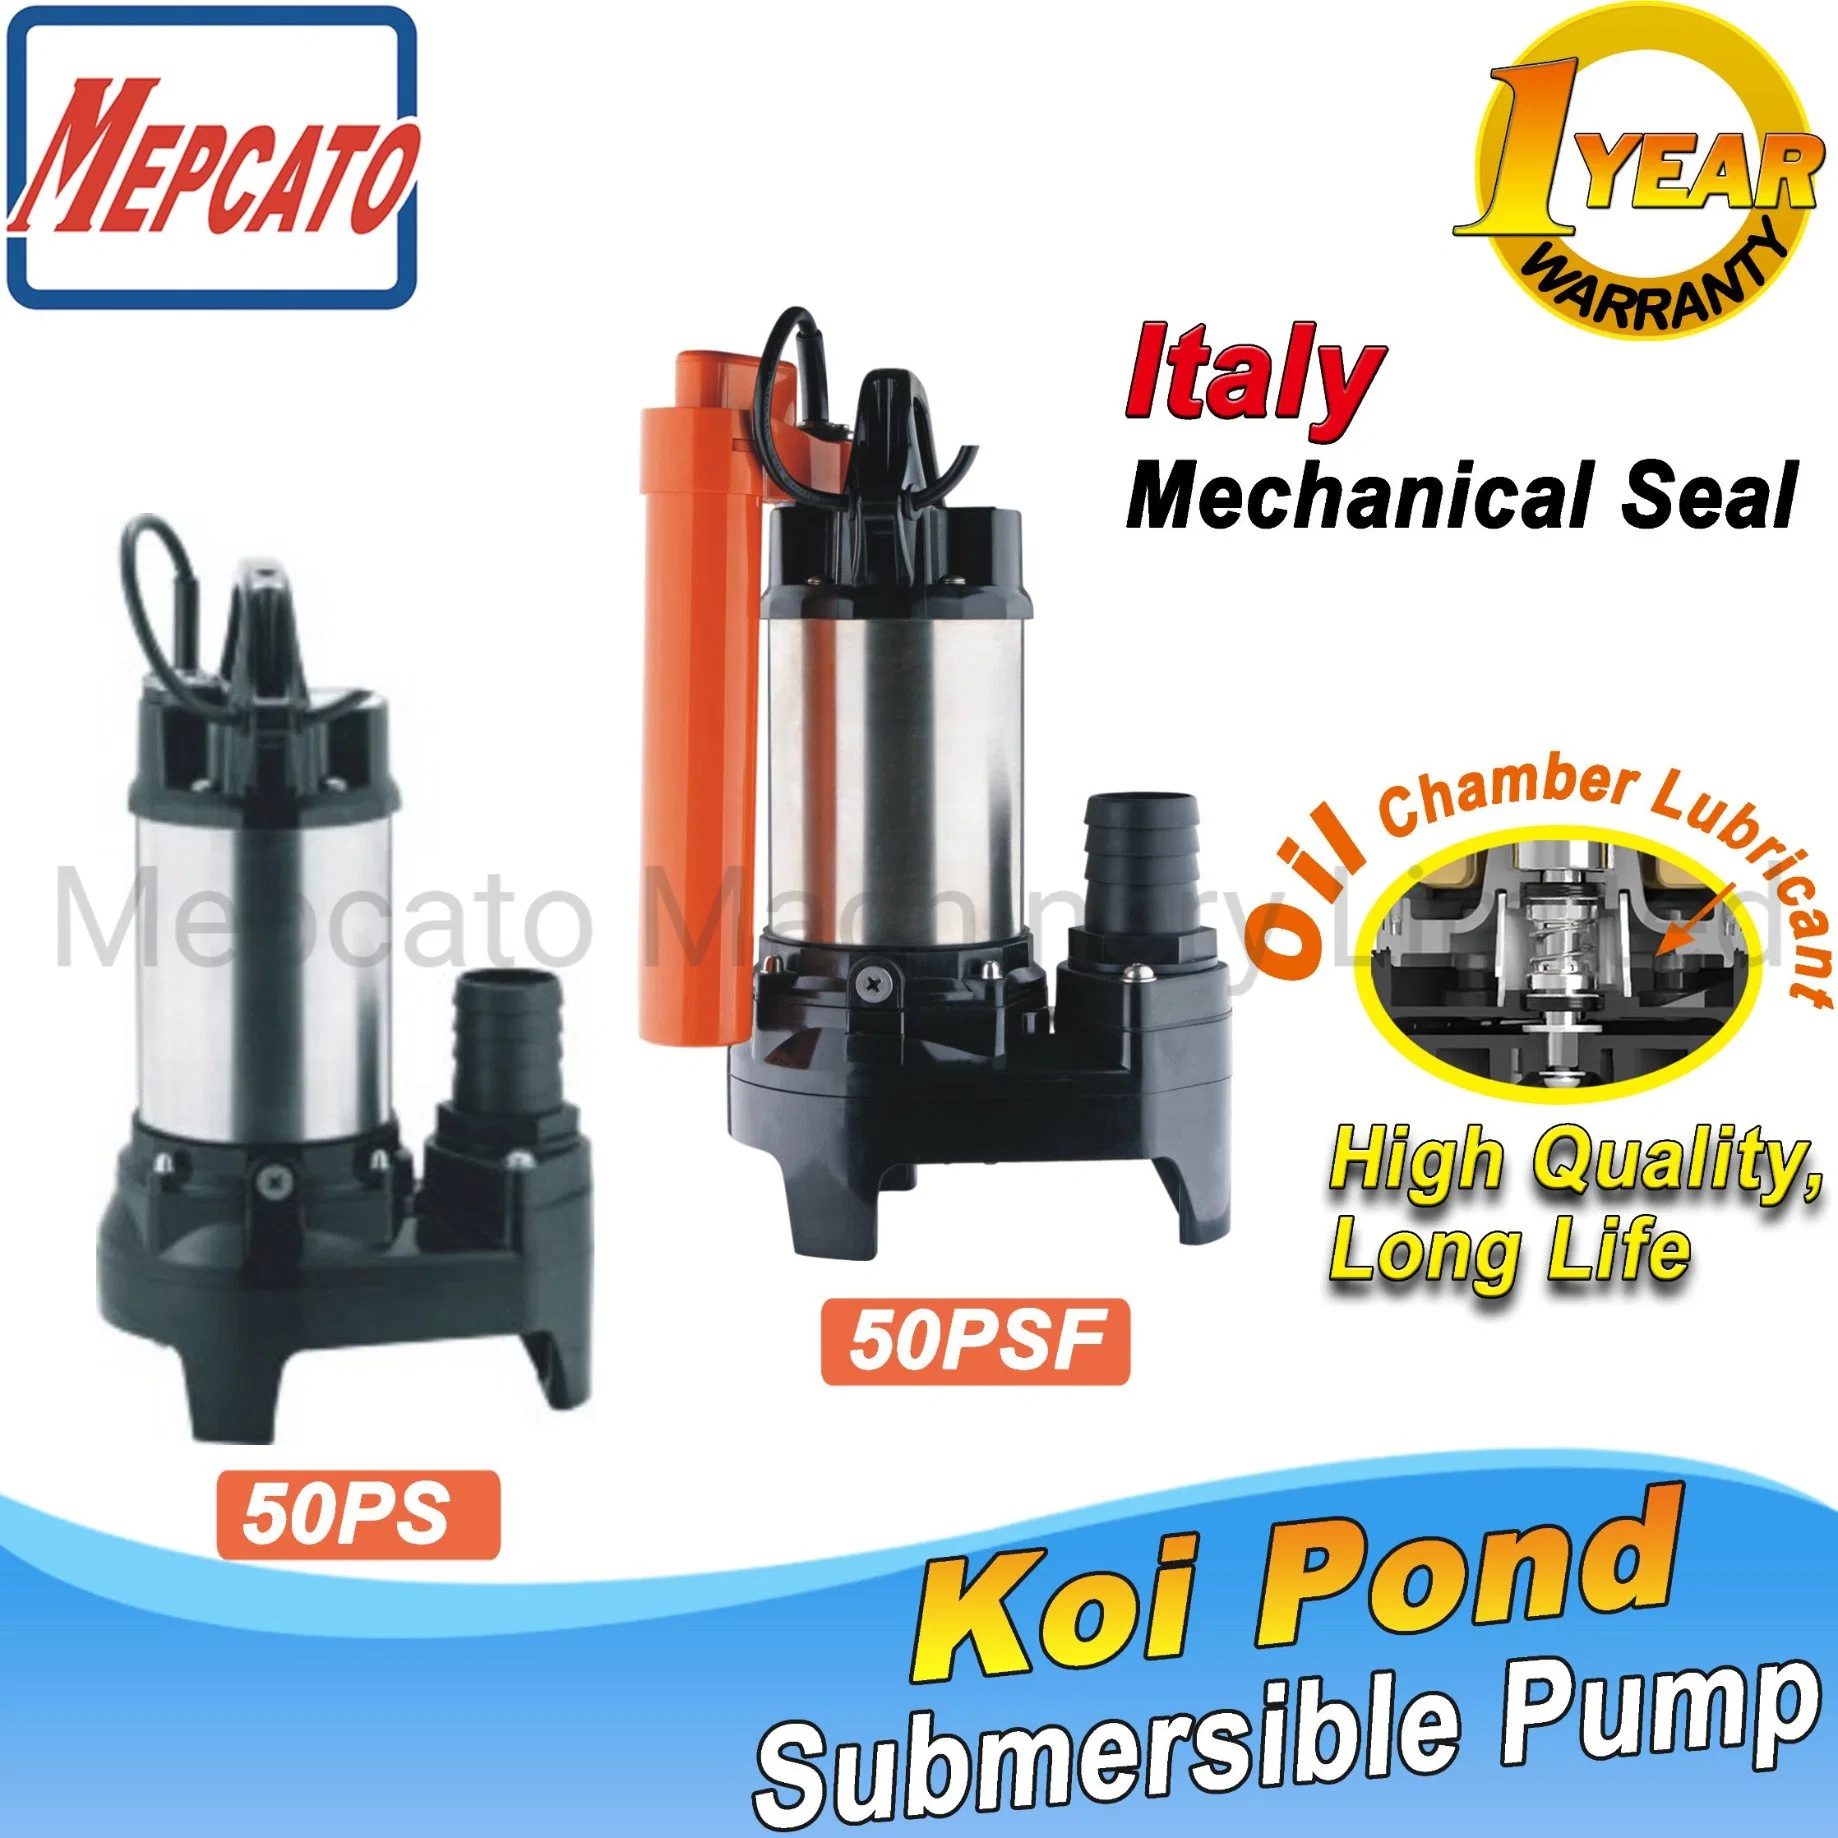 150W/400W Portable Fish Pond Water Supply Water Circulation Electric Stainless Steel Centrifugal Submersible Water Drainage Pump with Float Switch